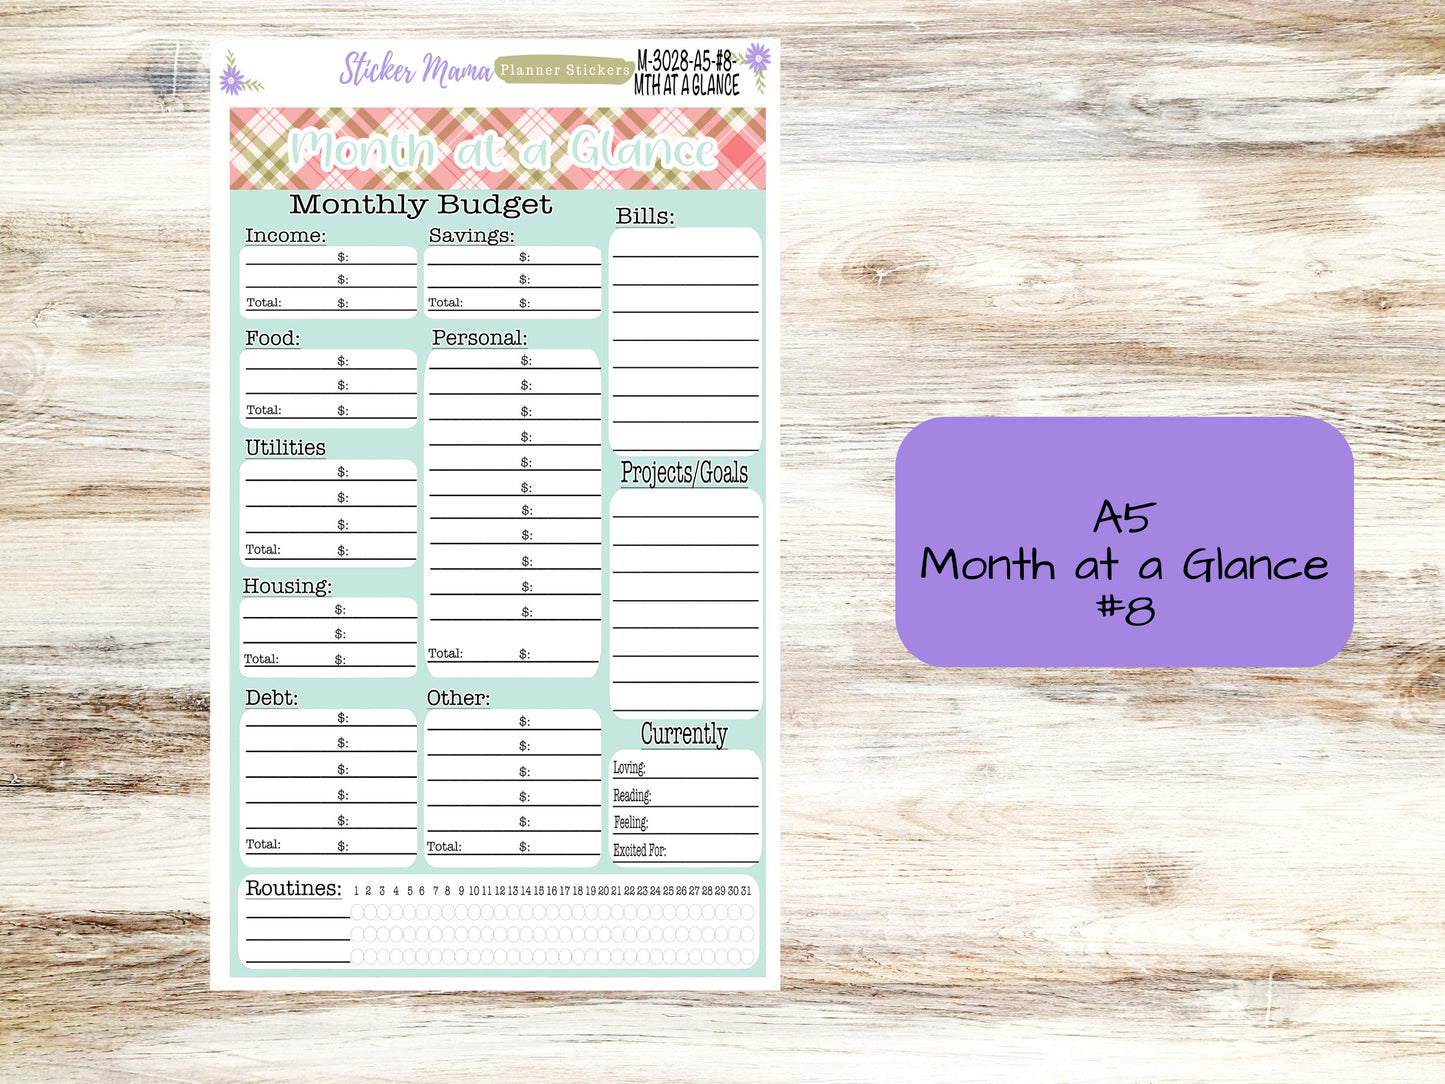 BUDGET - MONTH @ a GLANCE-3028 || A5 & 7x9 || Budget Sticker Kit || Notes Page Stickers || Planner Budget Kit